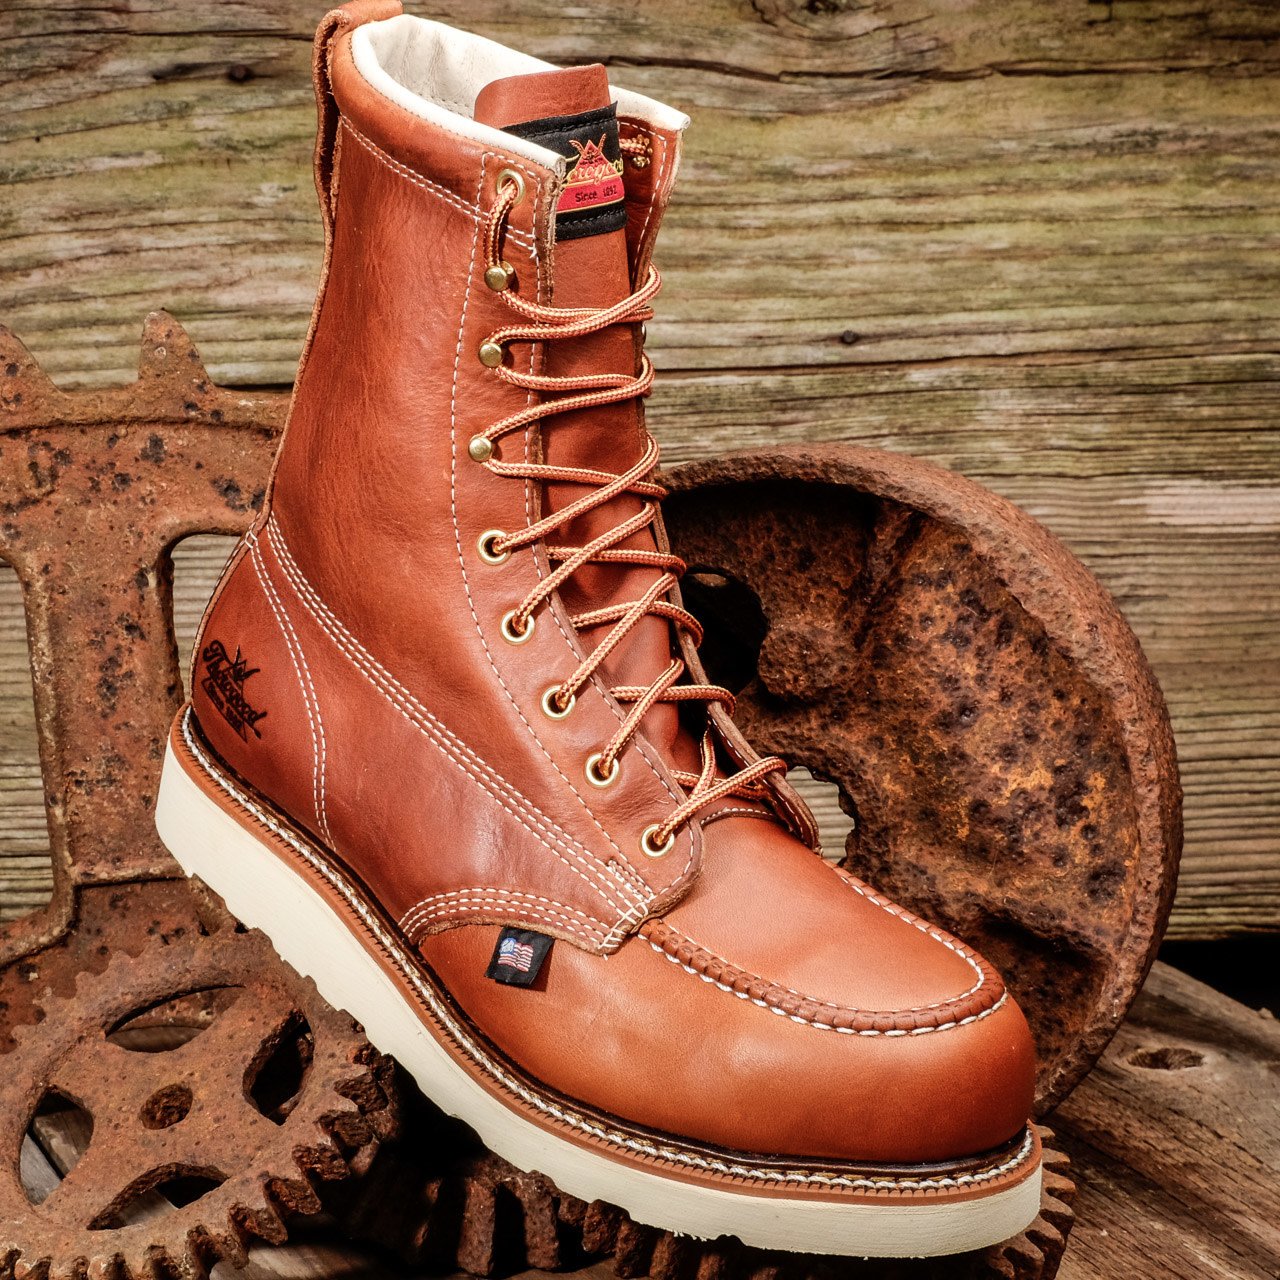 THOROGOOD AMERICAN HERITAGE CLASSIC Steel Toe EH Work Boots 804-4379 Toutes Les Tailles